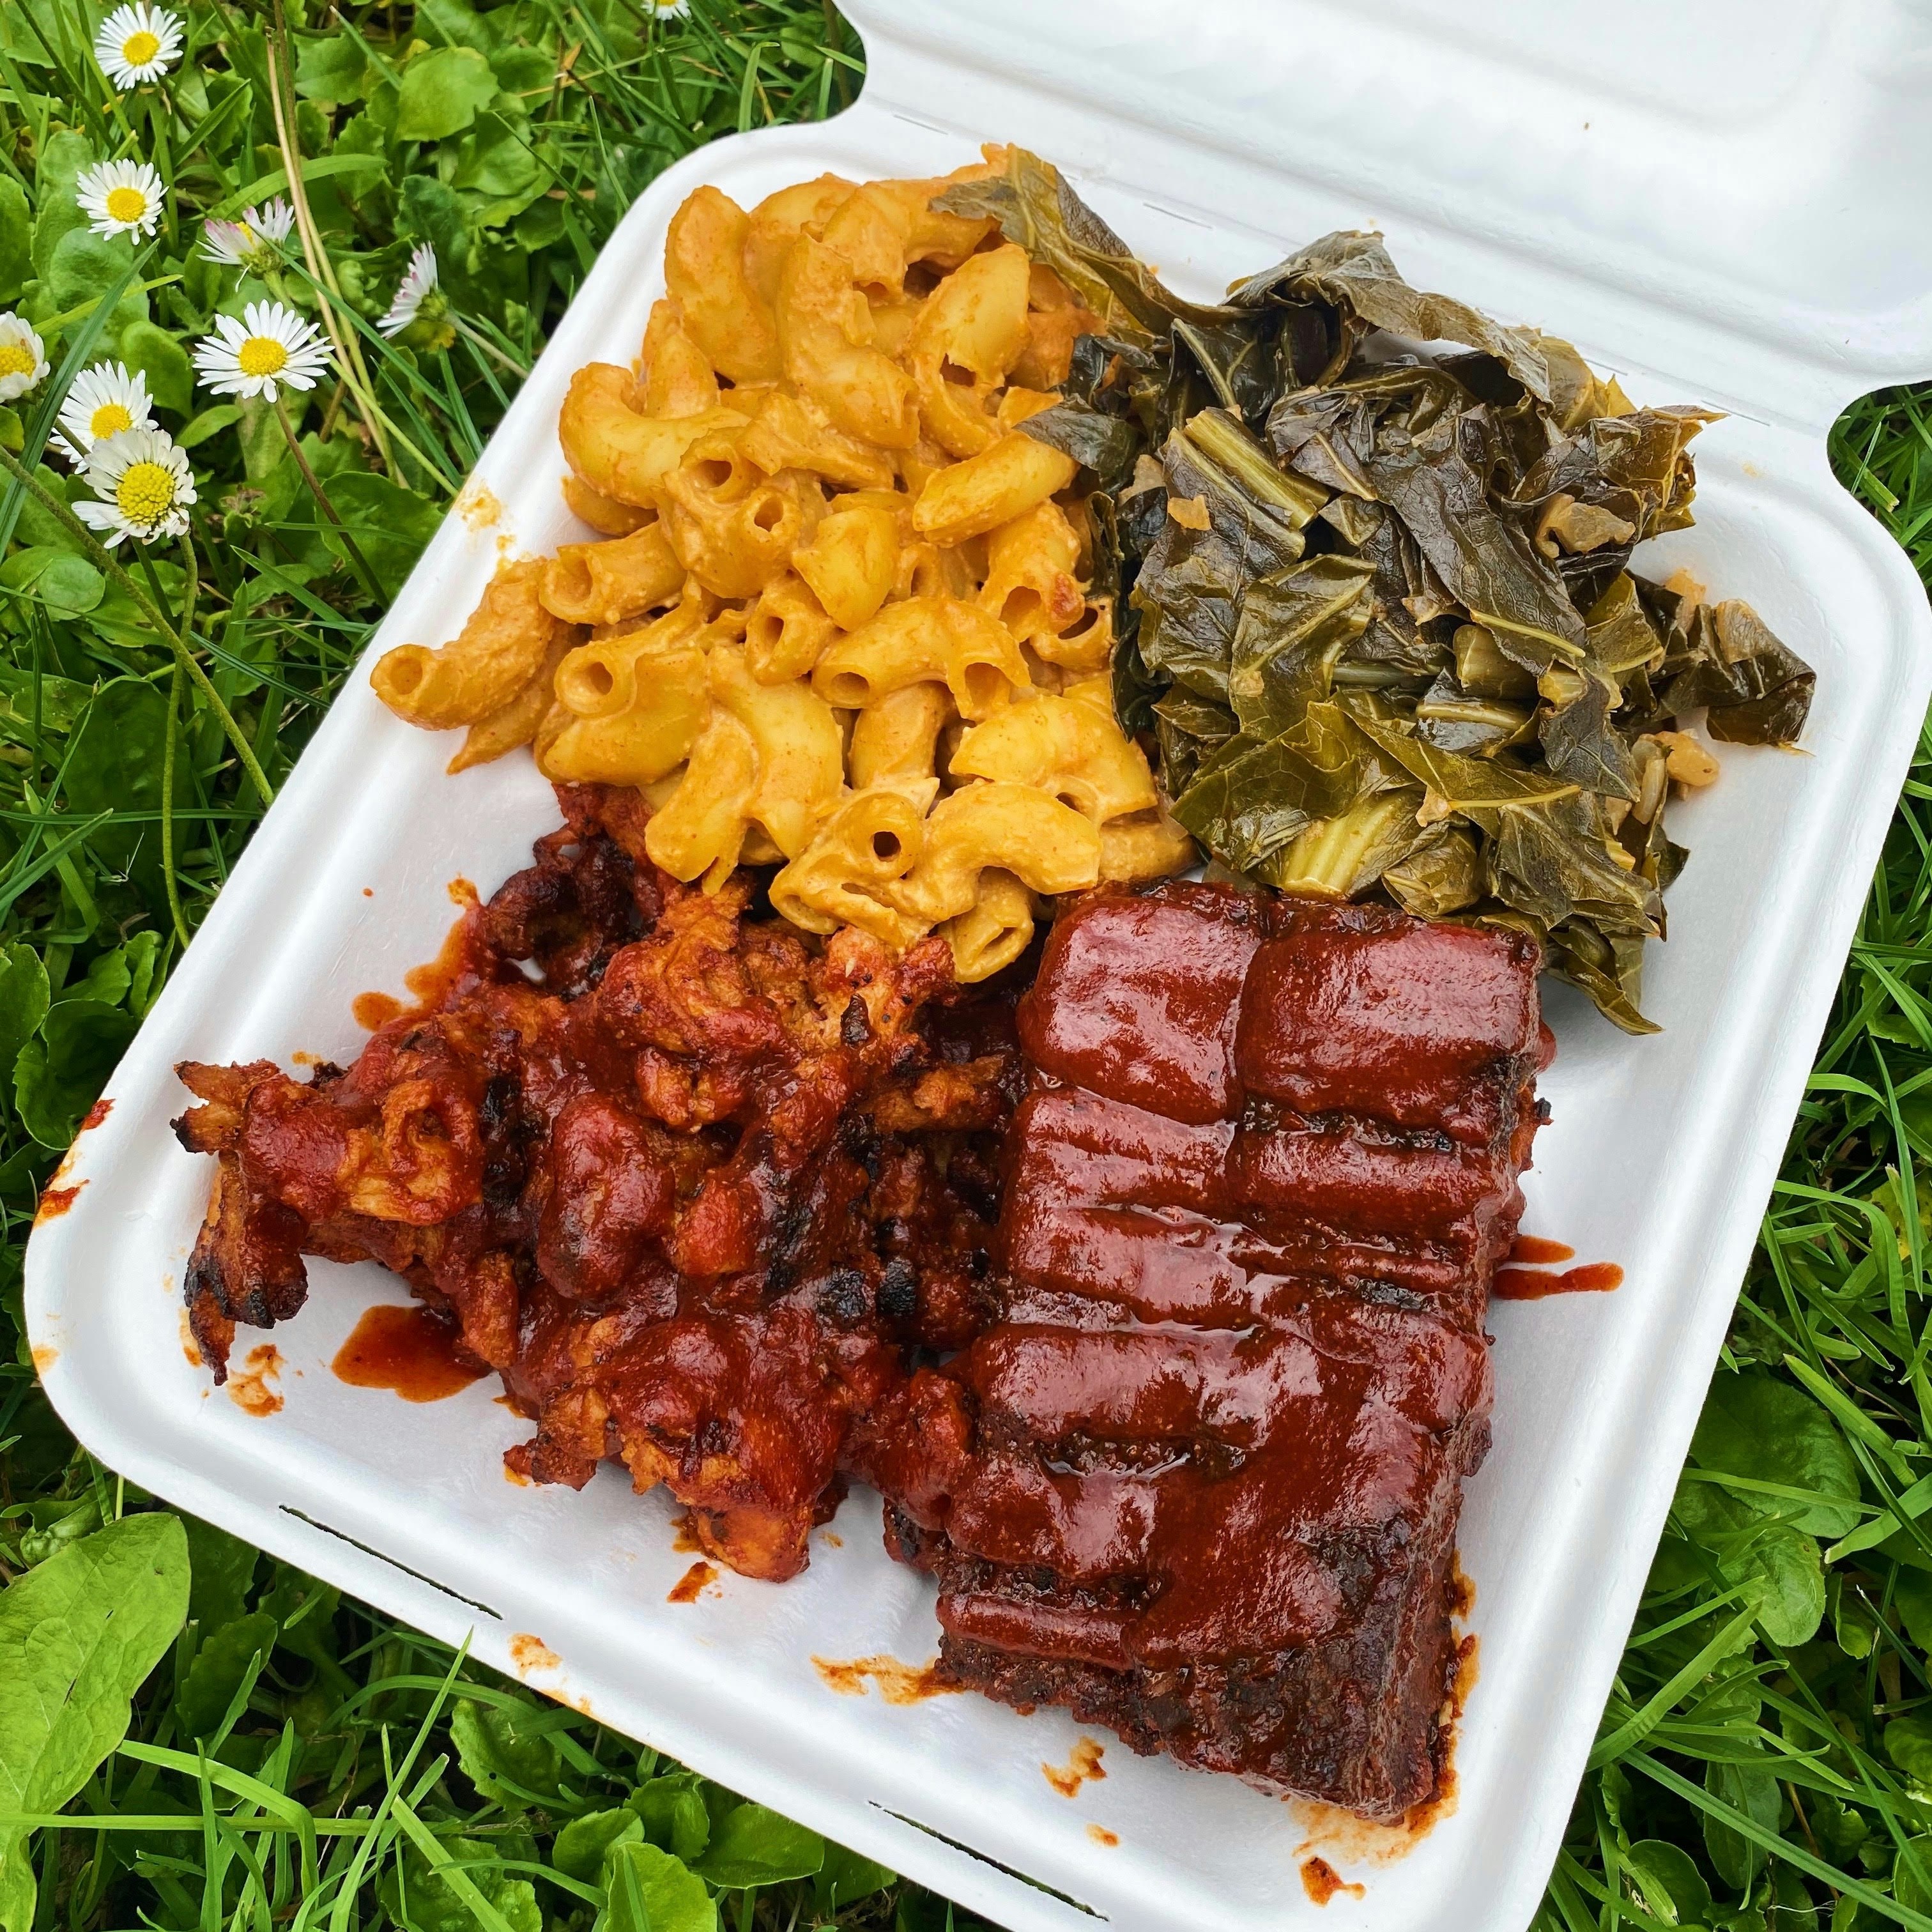 Carry-out vegan barbecue from Homegrown Smoker